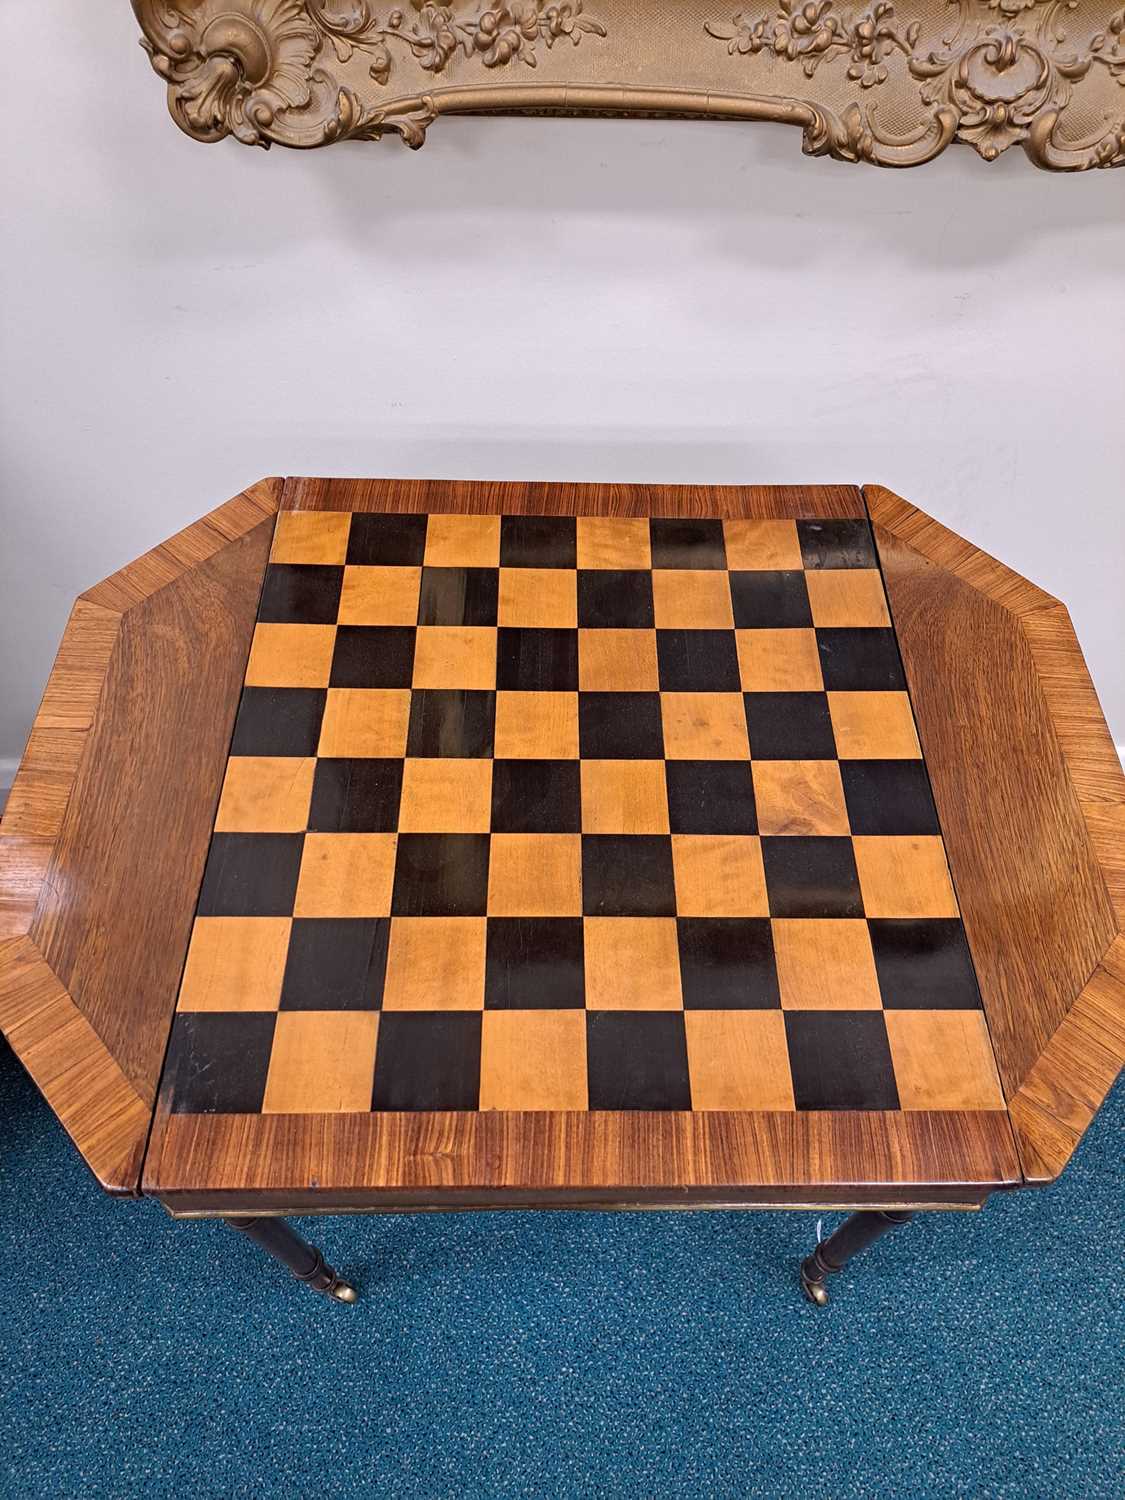 A George IV mahogany games table, with a 19th century bone chess set (2) - Image 4 of 5